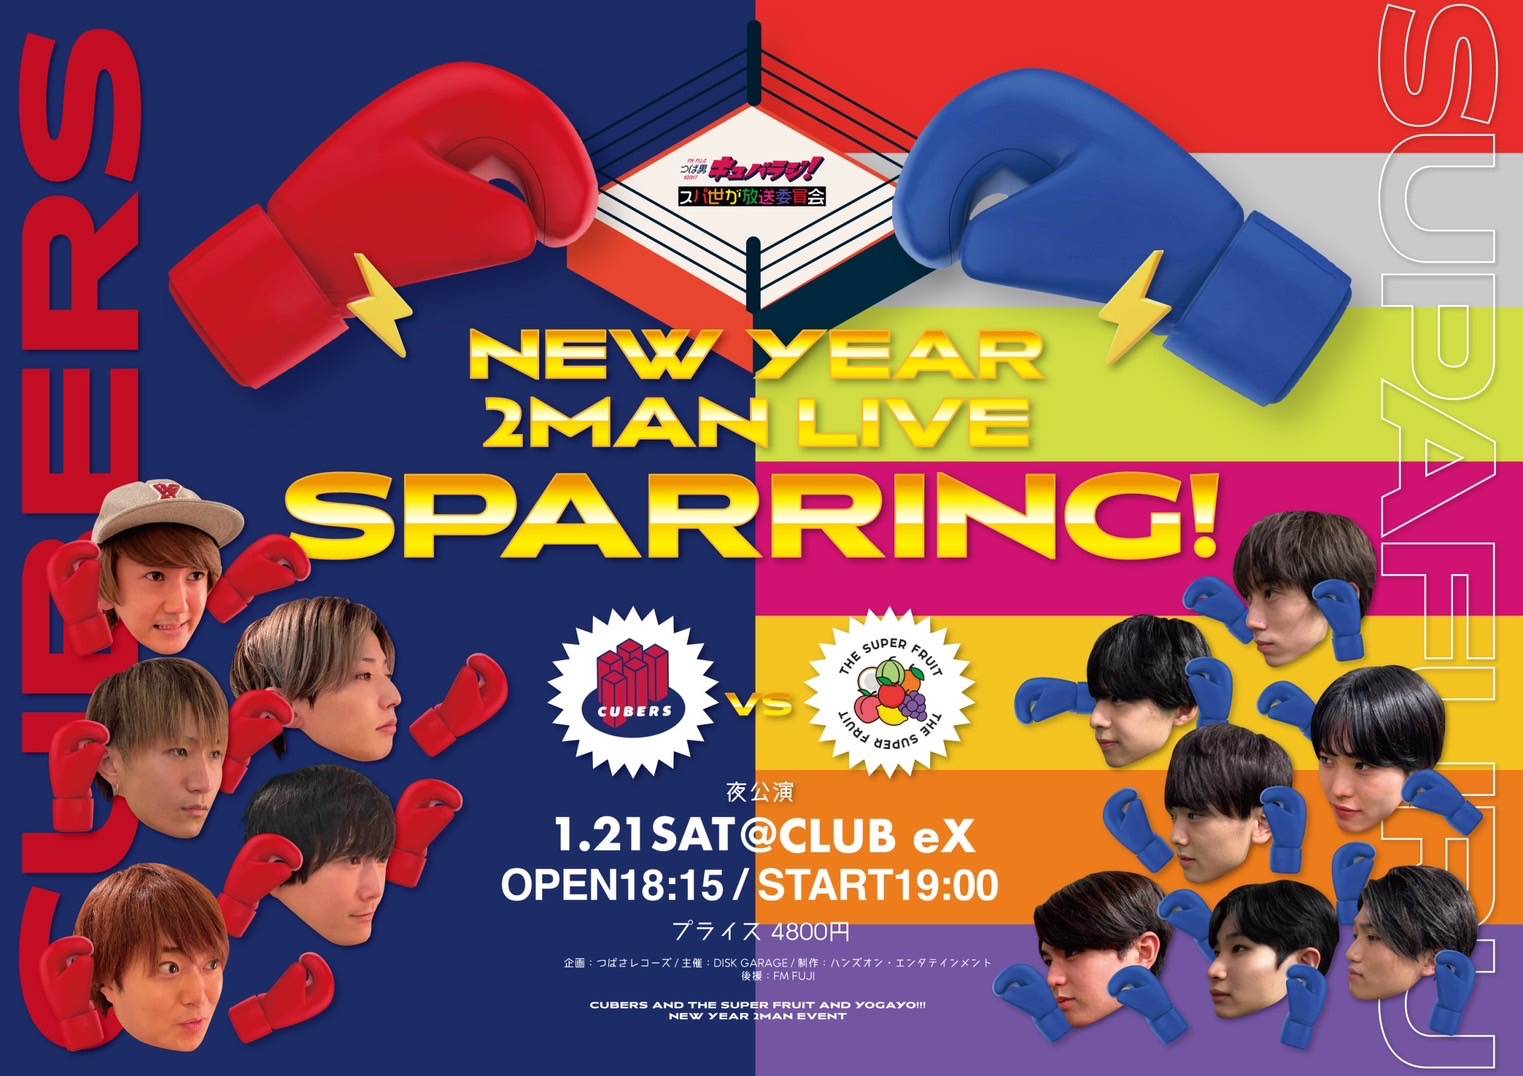 【NEWS】2023年1月21日(土)に”FM FUJI つば男NIGHT presents”「New Year 2Man Live Sparring  CUBERS × THE SUPER FRUIT」開催決定！